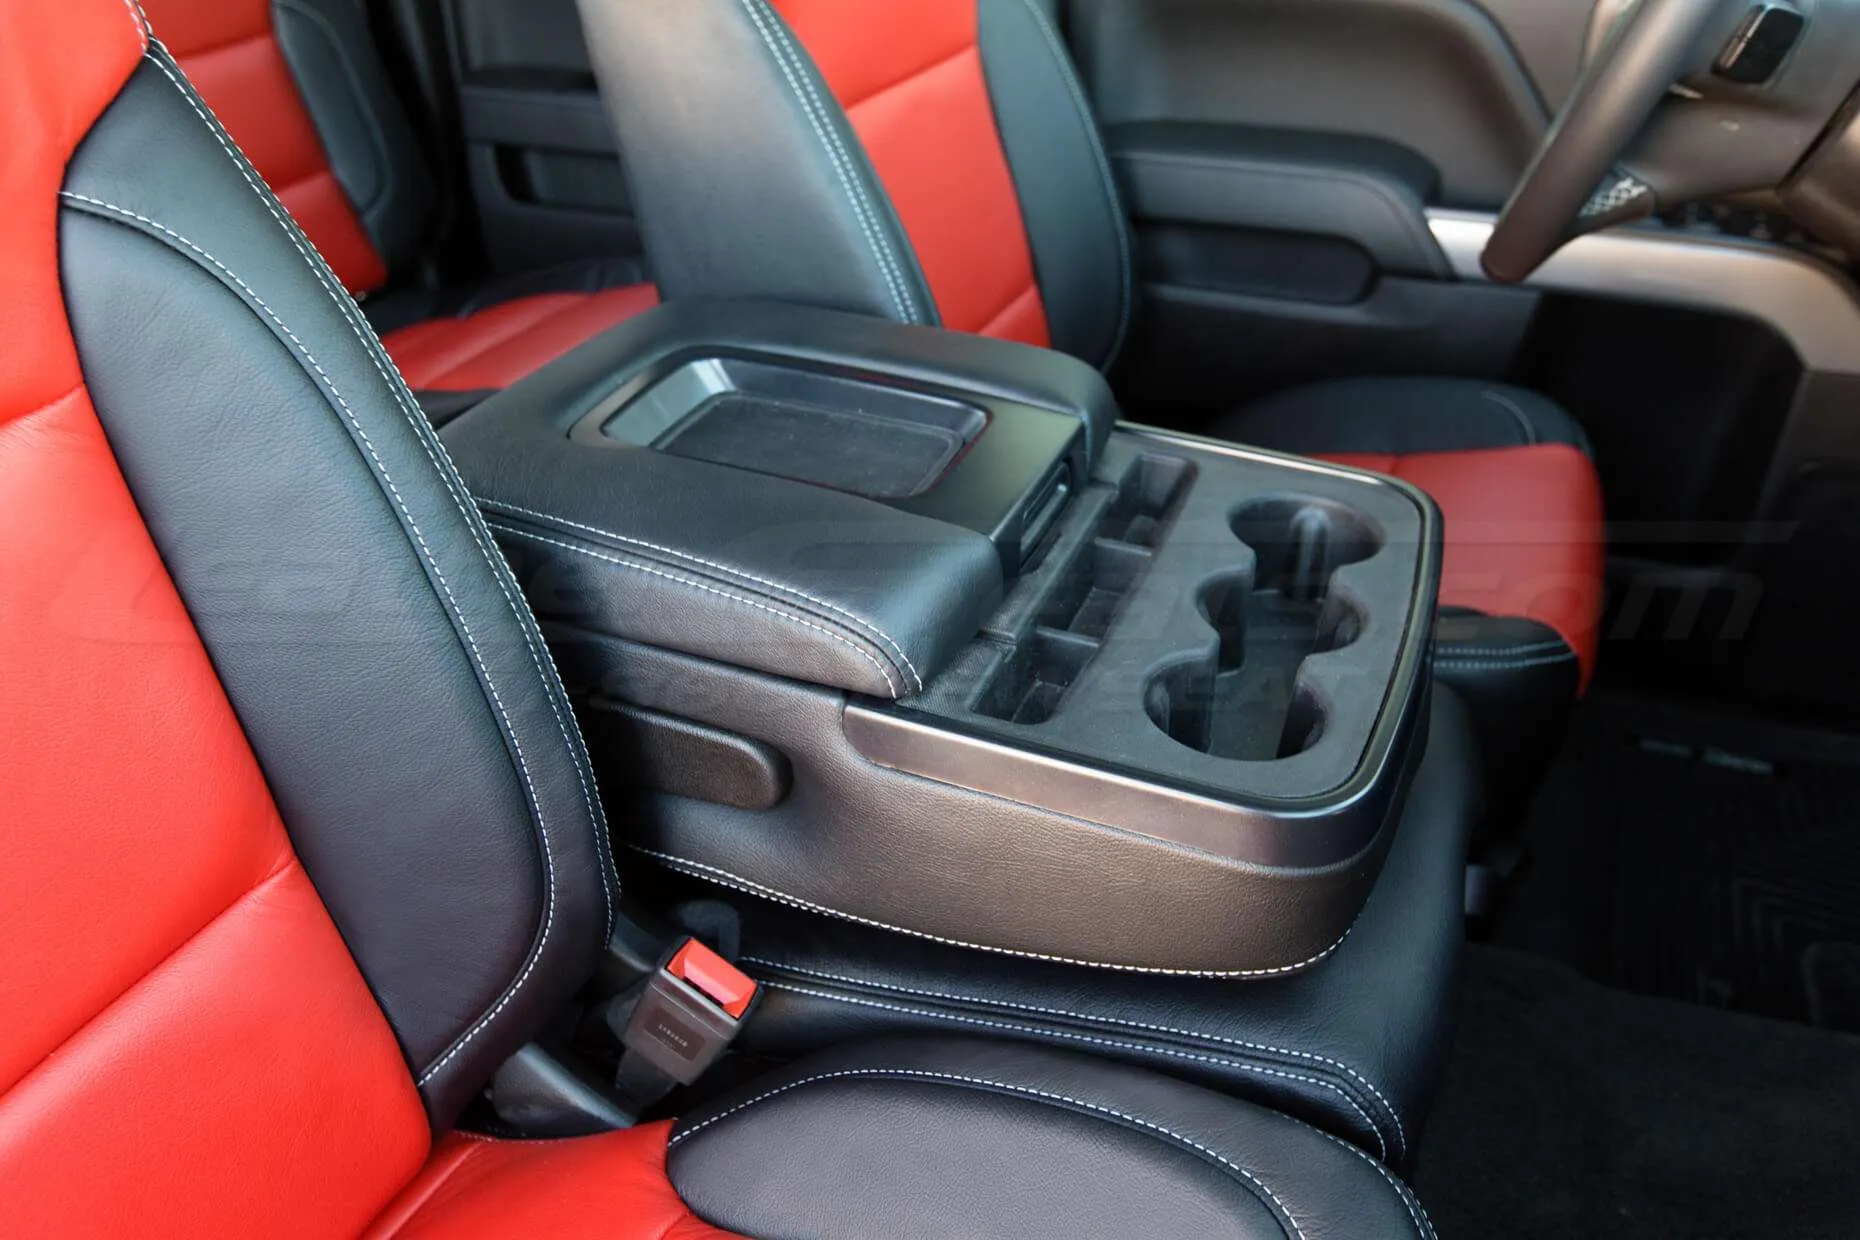 GMC Sierra leather upholstery kit - Black and Bright Red - installed - Center Console Side view